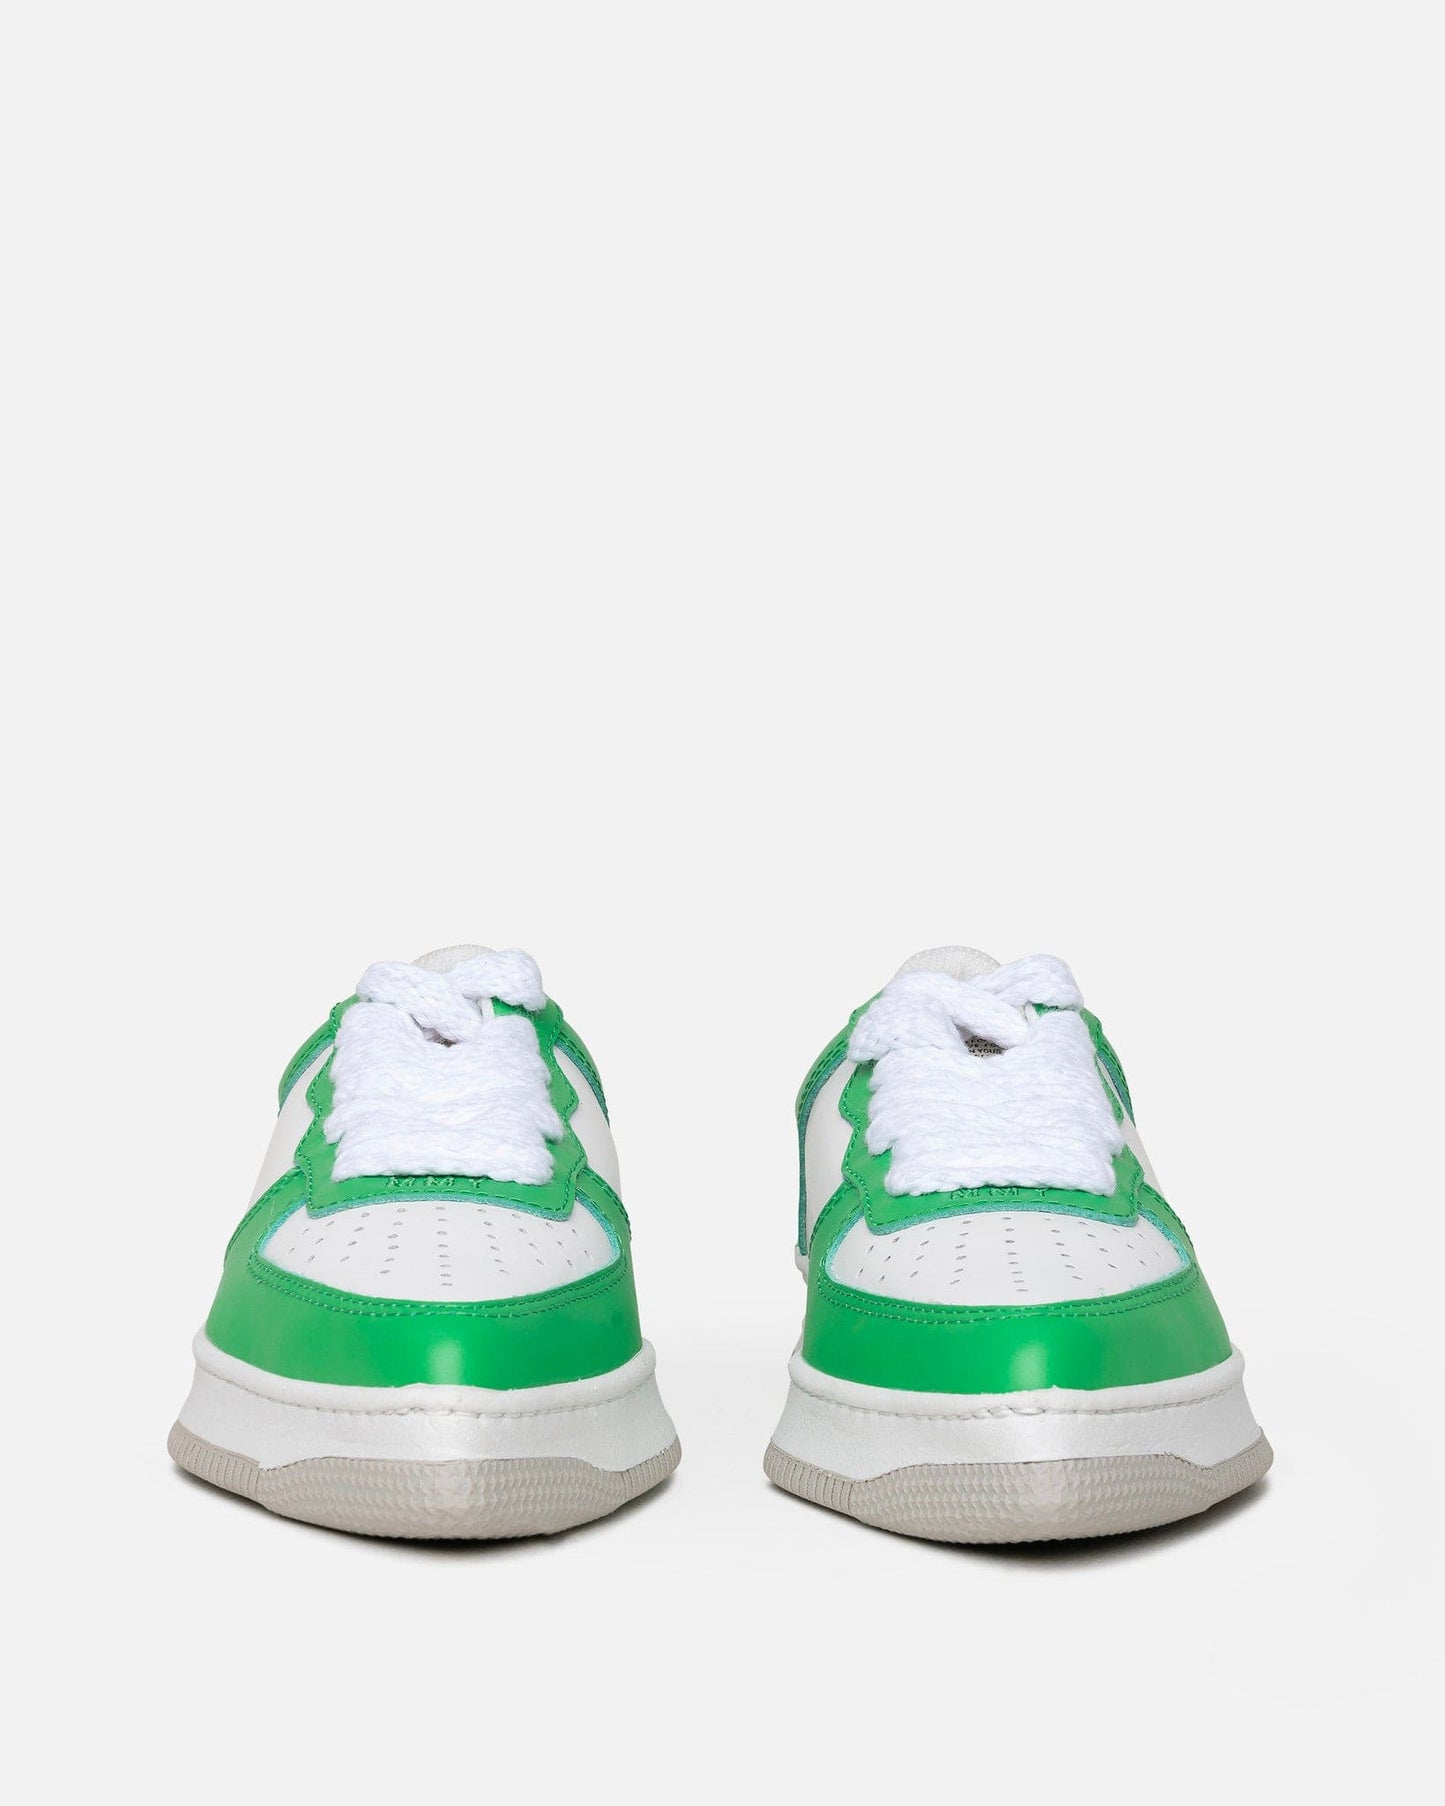 Maison Mihara Yasuhiro Women Sneakers Pointed Leather Low Sneakers in Green/White